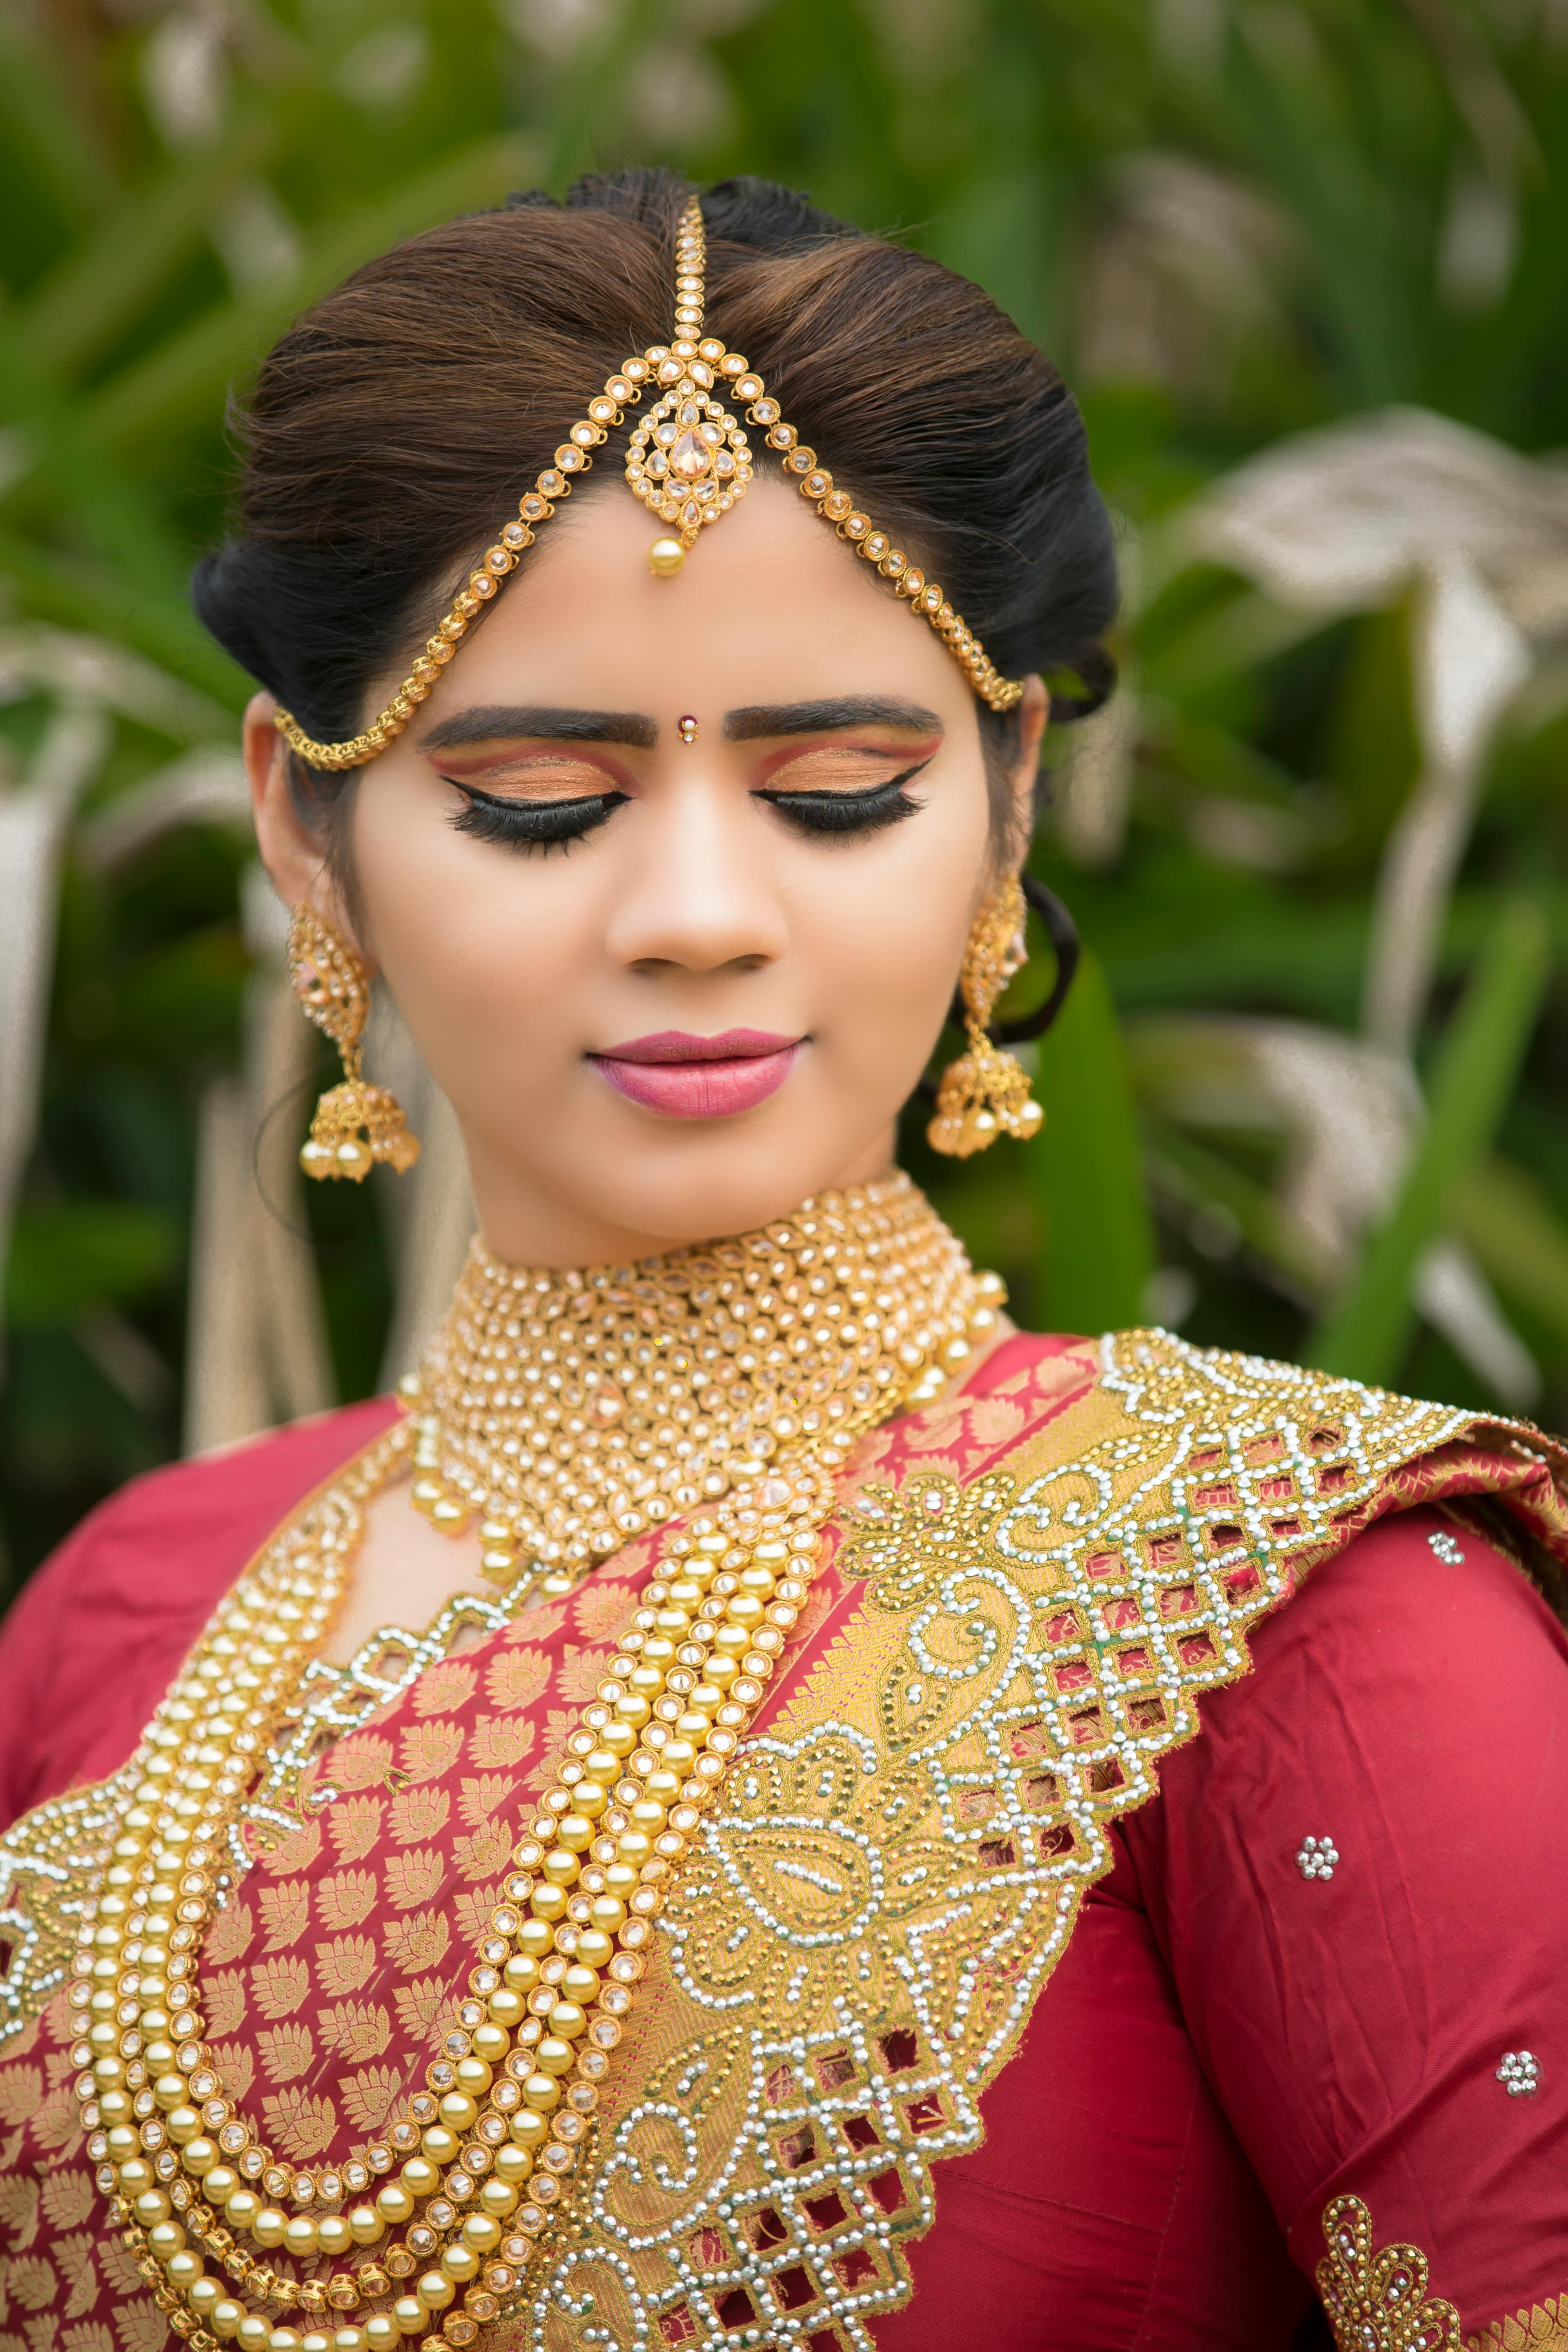 Latest 25 South-Indian Bridal Hairstyles - Get Inspiring Ideas for Planning  Your Perfect Wedding at fabweddings